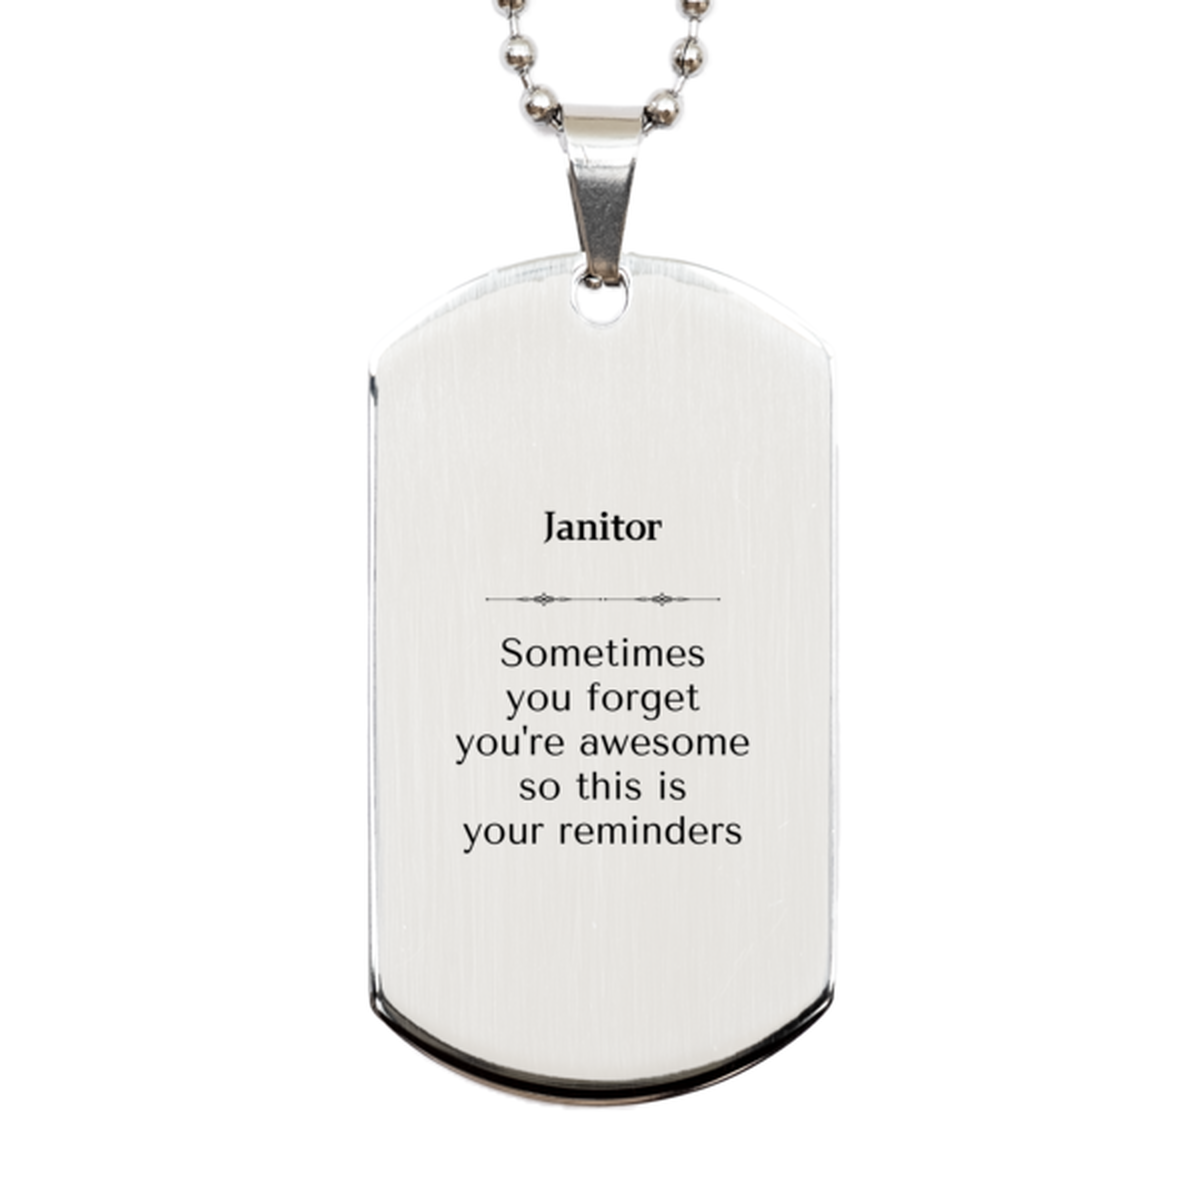 Sentimental Janitor Silver Dog Tag, Janitor Sometimes you forget you're awesome so this is your reminders, Graduation Christmas Birthday Gifts for Janitor, Men, Women, Coworkers